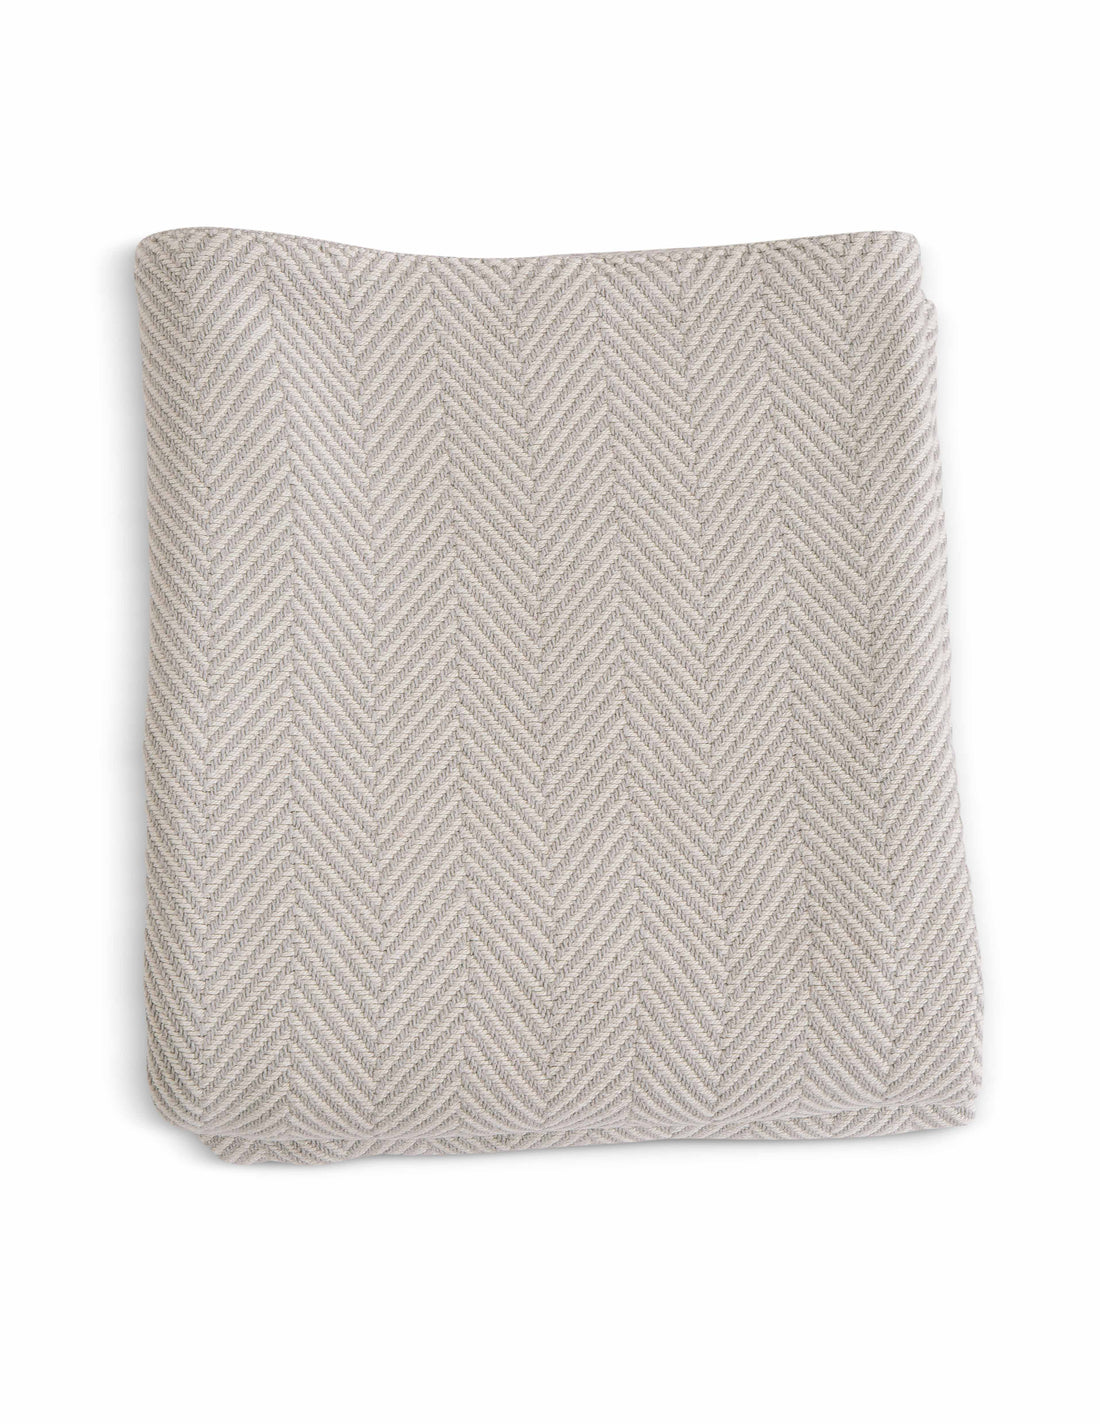 Evangeline's Natural/grey colored 100% cotton herringbone woven blanket, folded. Sizes twin, full/queen, and king. The breathable quality of cotton with the weight and warmth of a wool blanket.